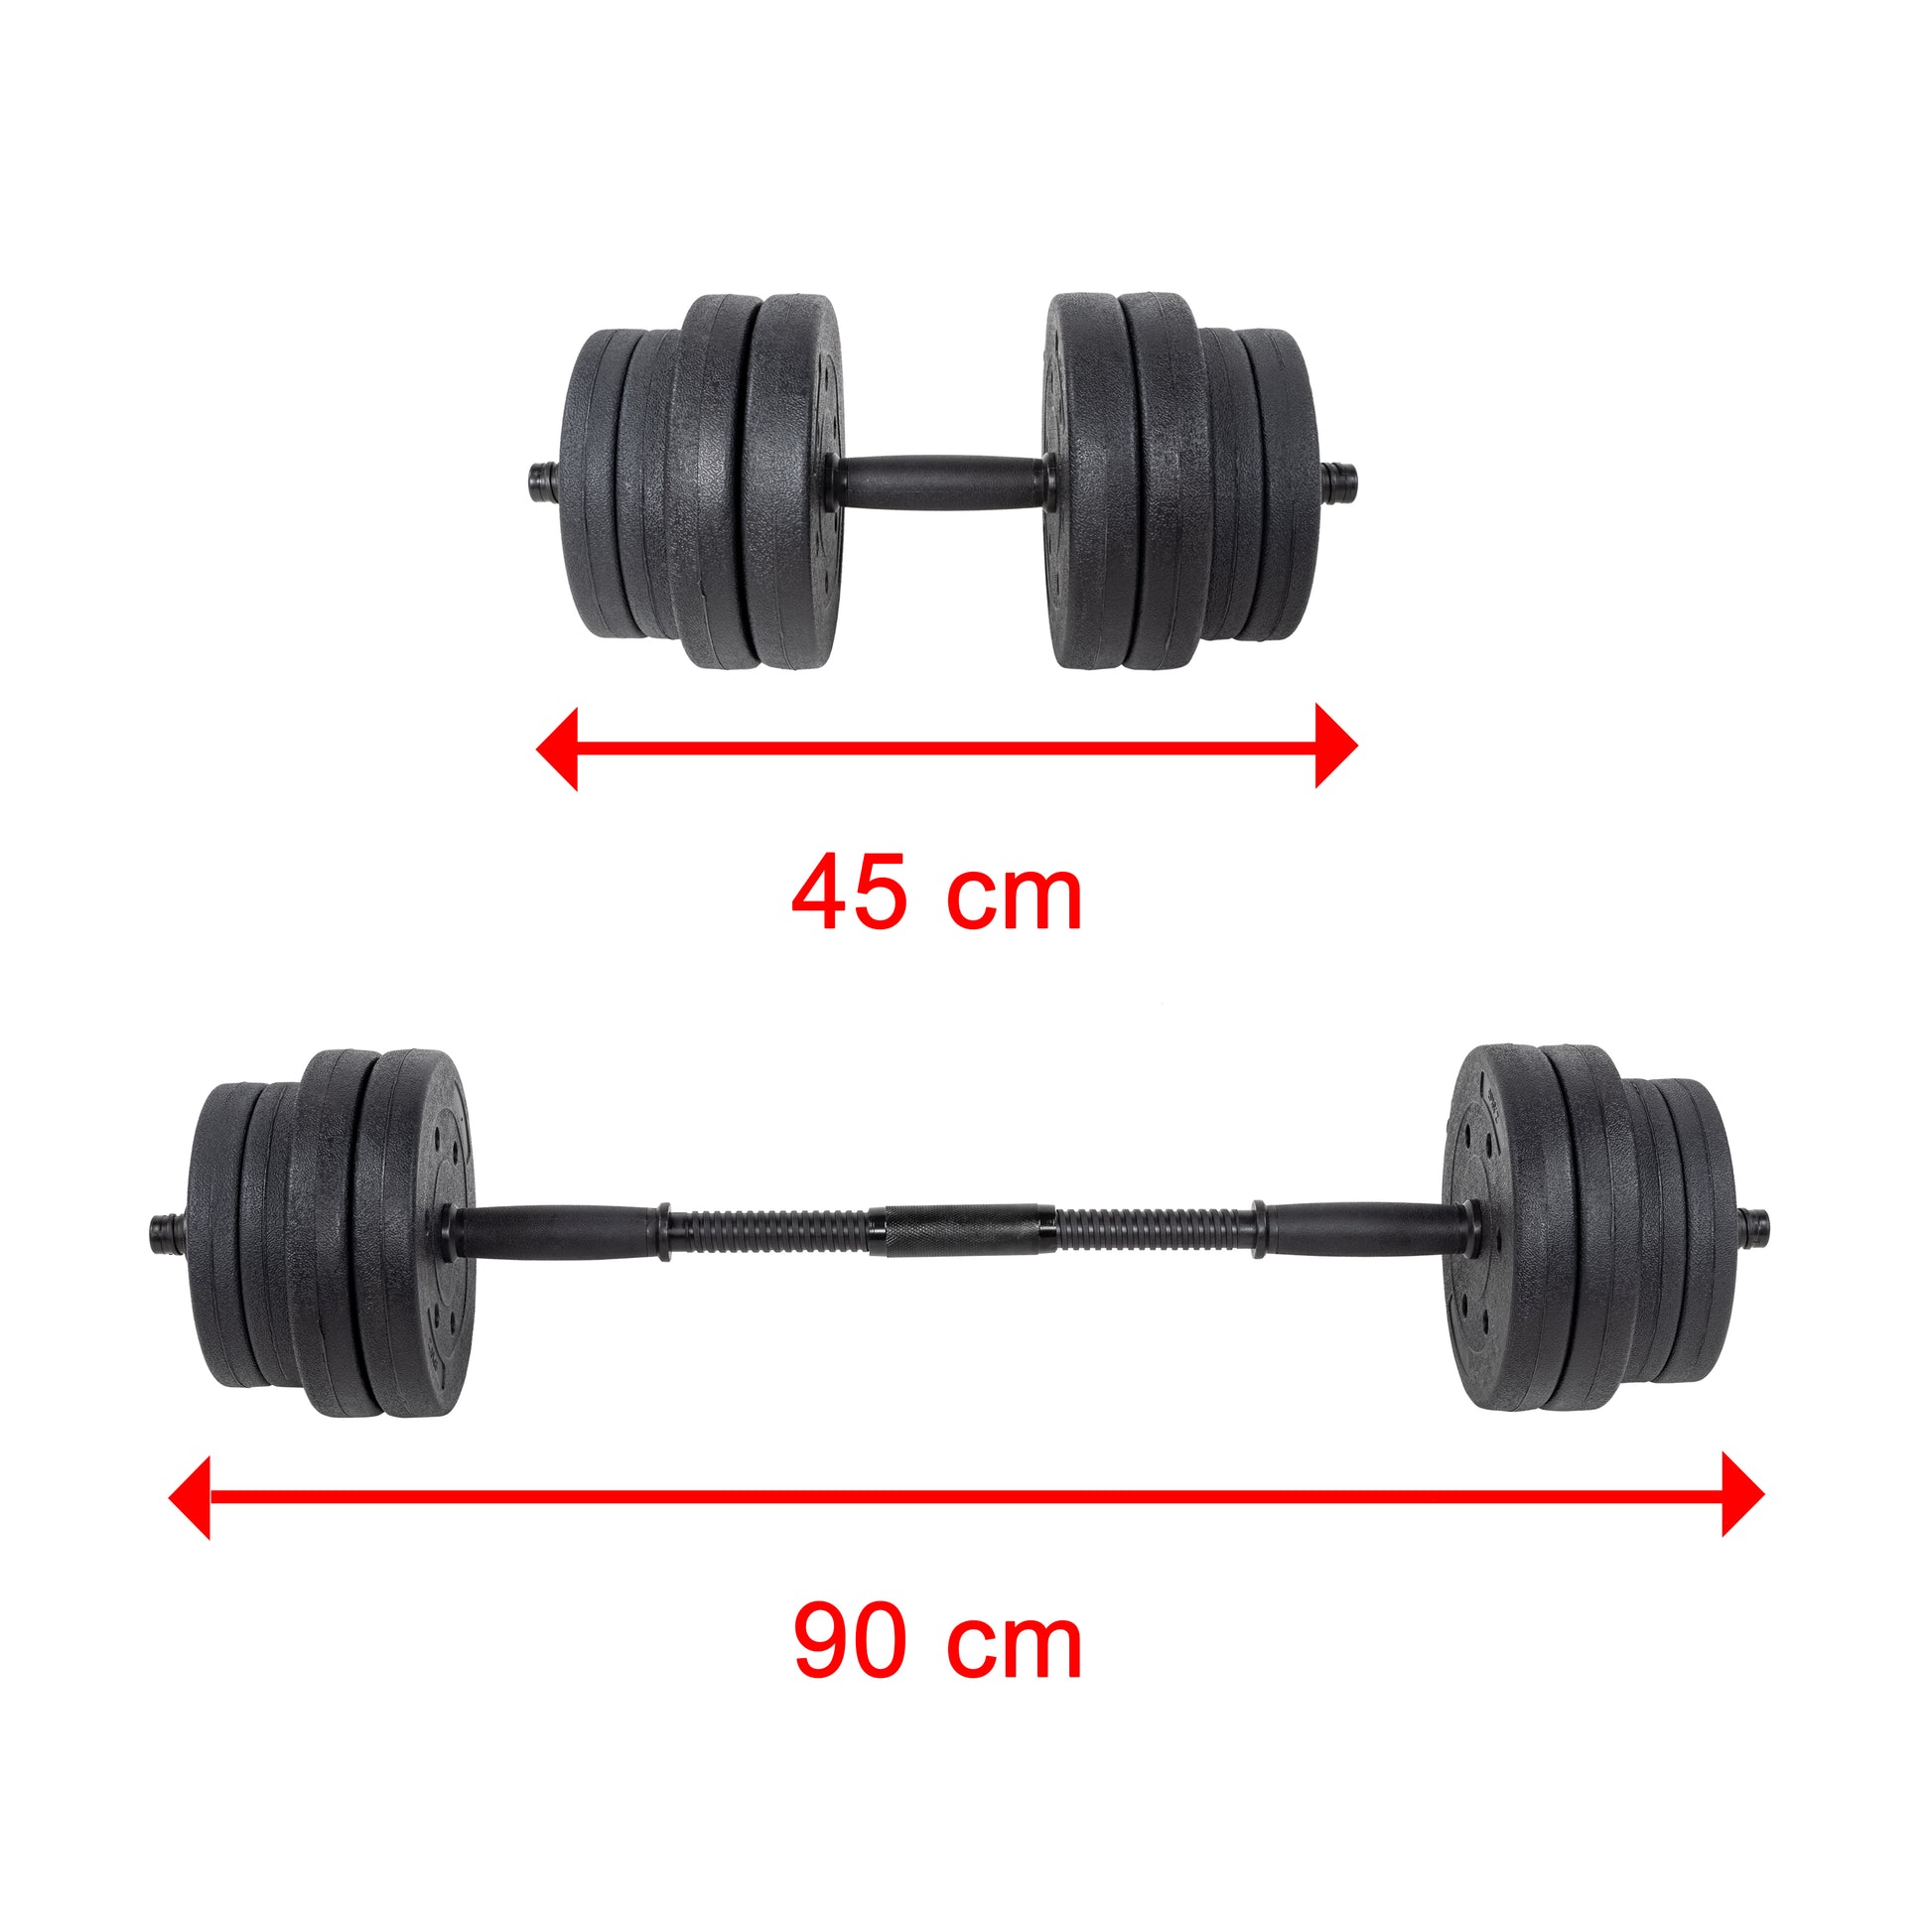 20kg Dumbbell Set Home Gym Fitness Exercise Weights Bar Plate - image8